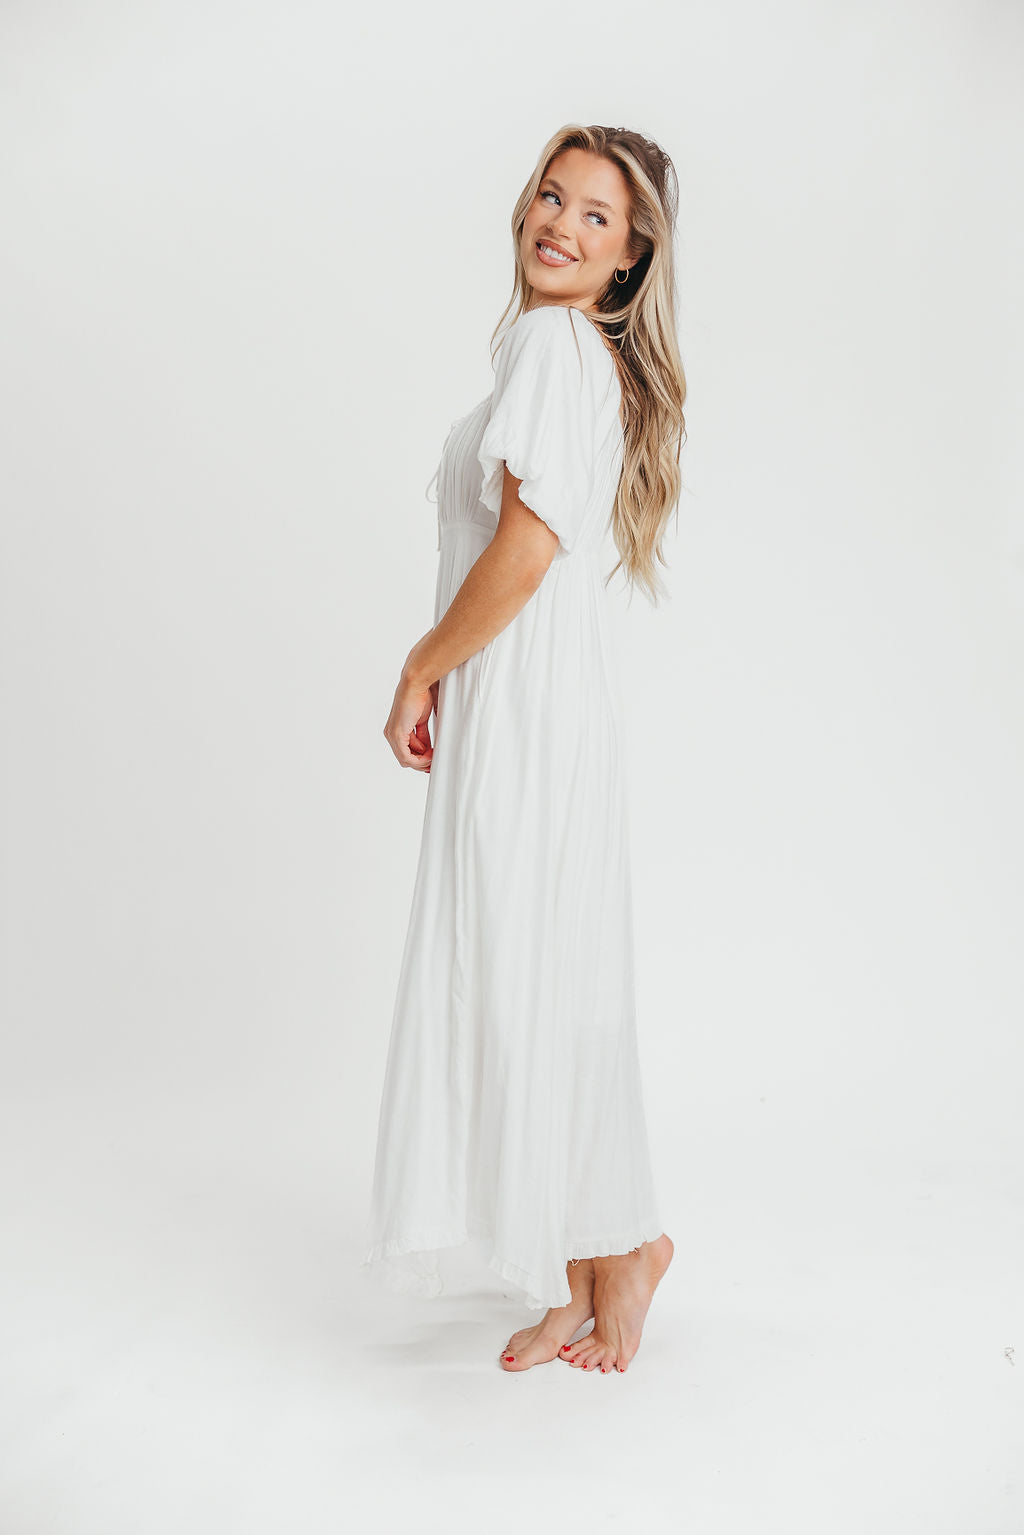 Chesley Puffed Sleeve Maxi Dress with Front Tie Detail in White - Bump Friendly